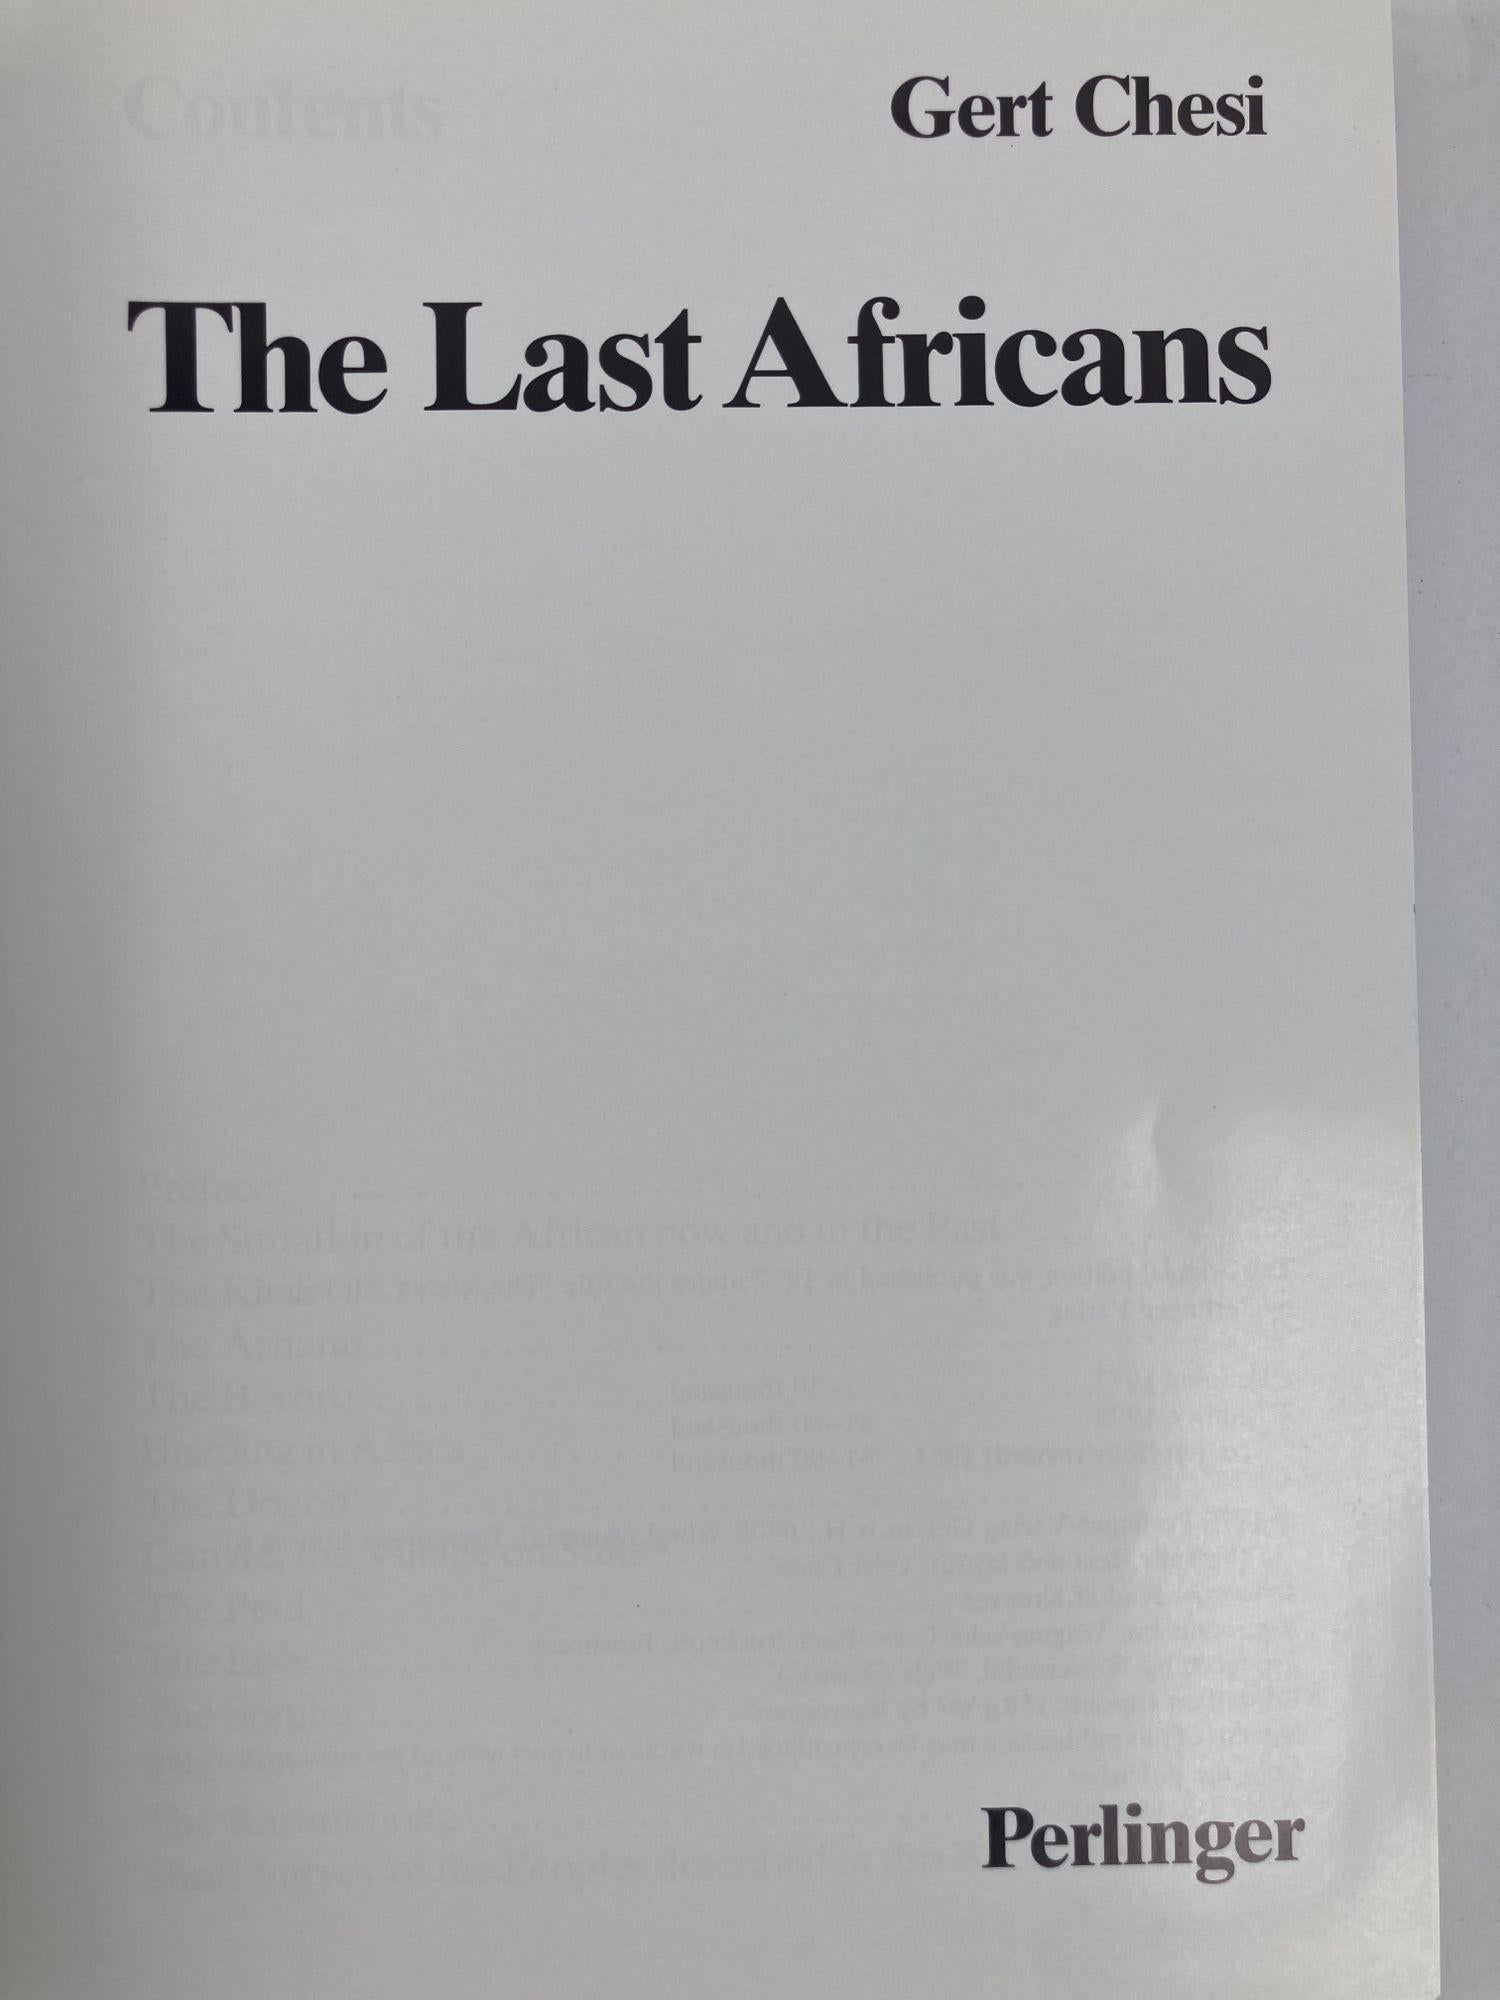 The Last Africans by Gert Chesi Hardcover Book 1981 For Sale 3